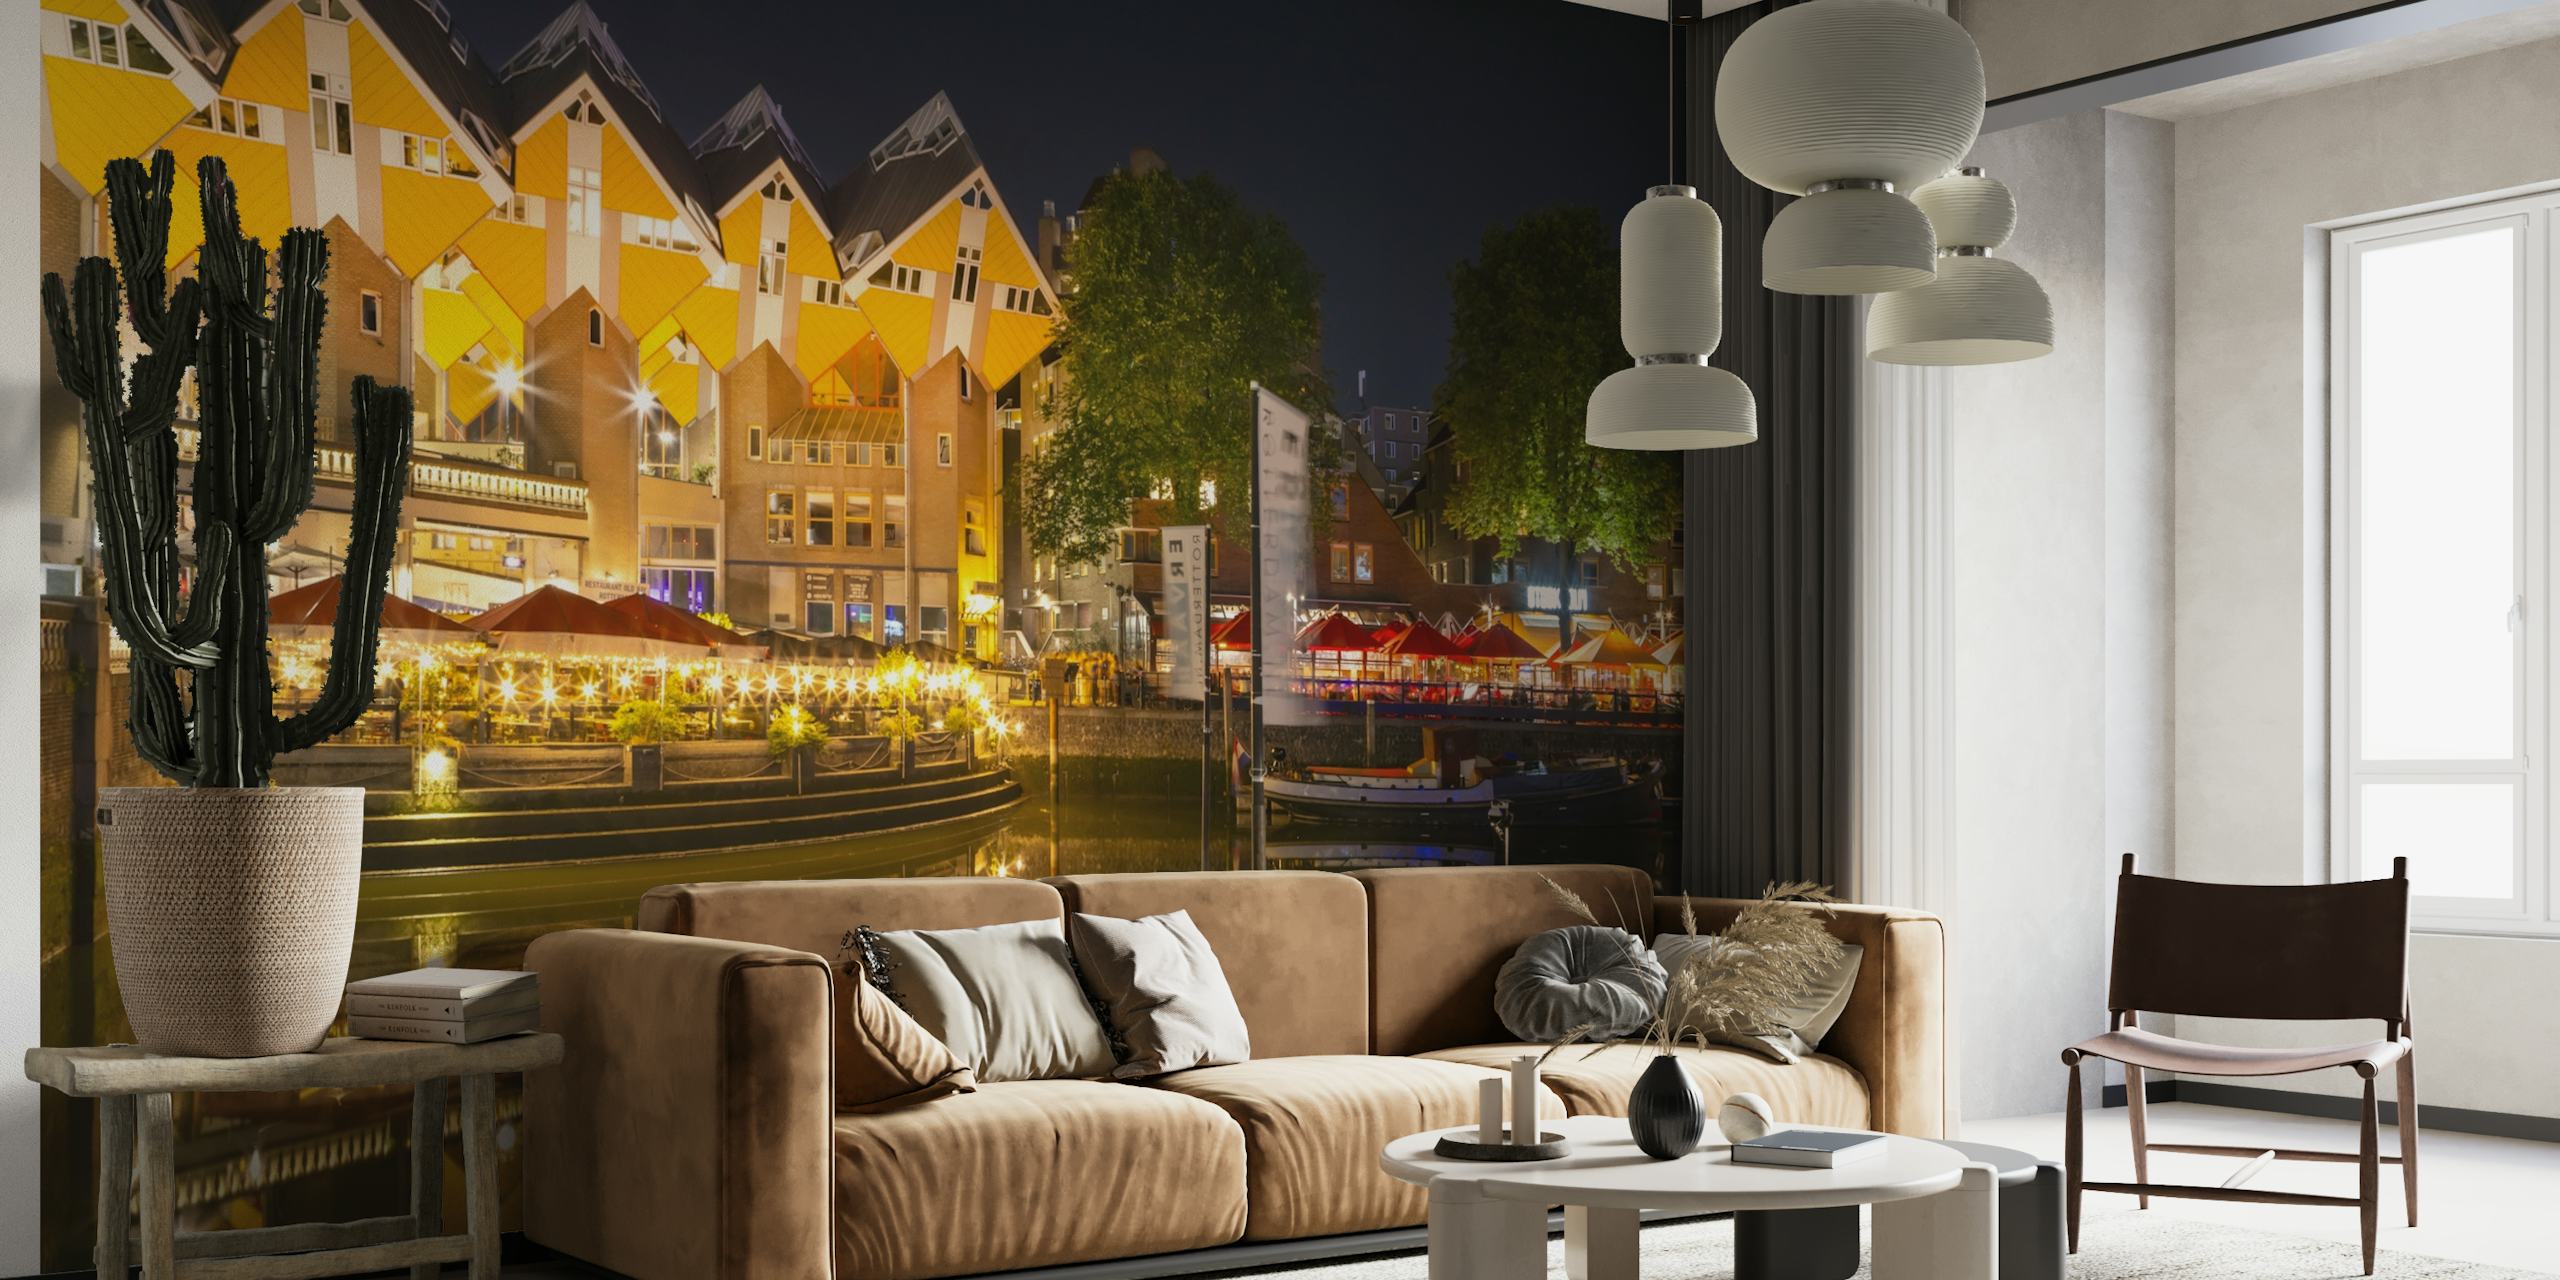 ROTTERDAM Oude Haven and Cube Houses by night papel de parede